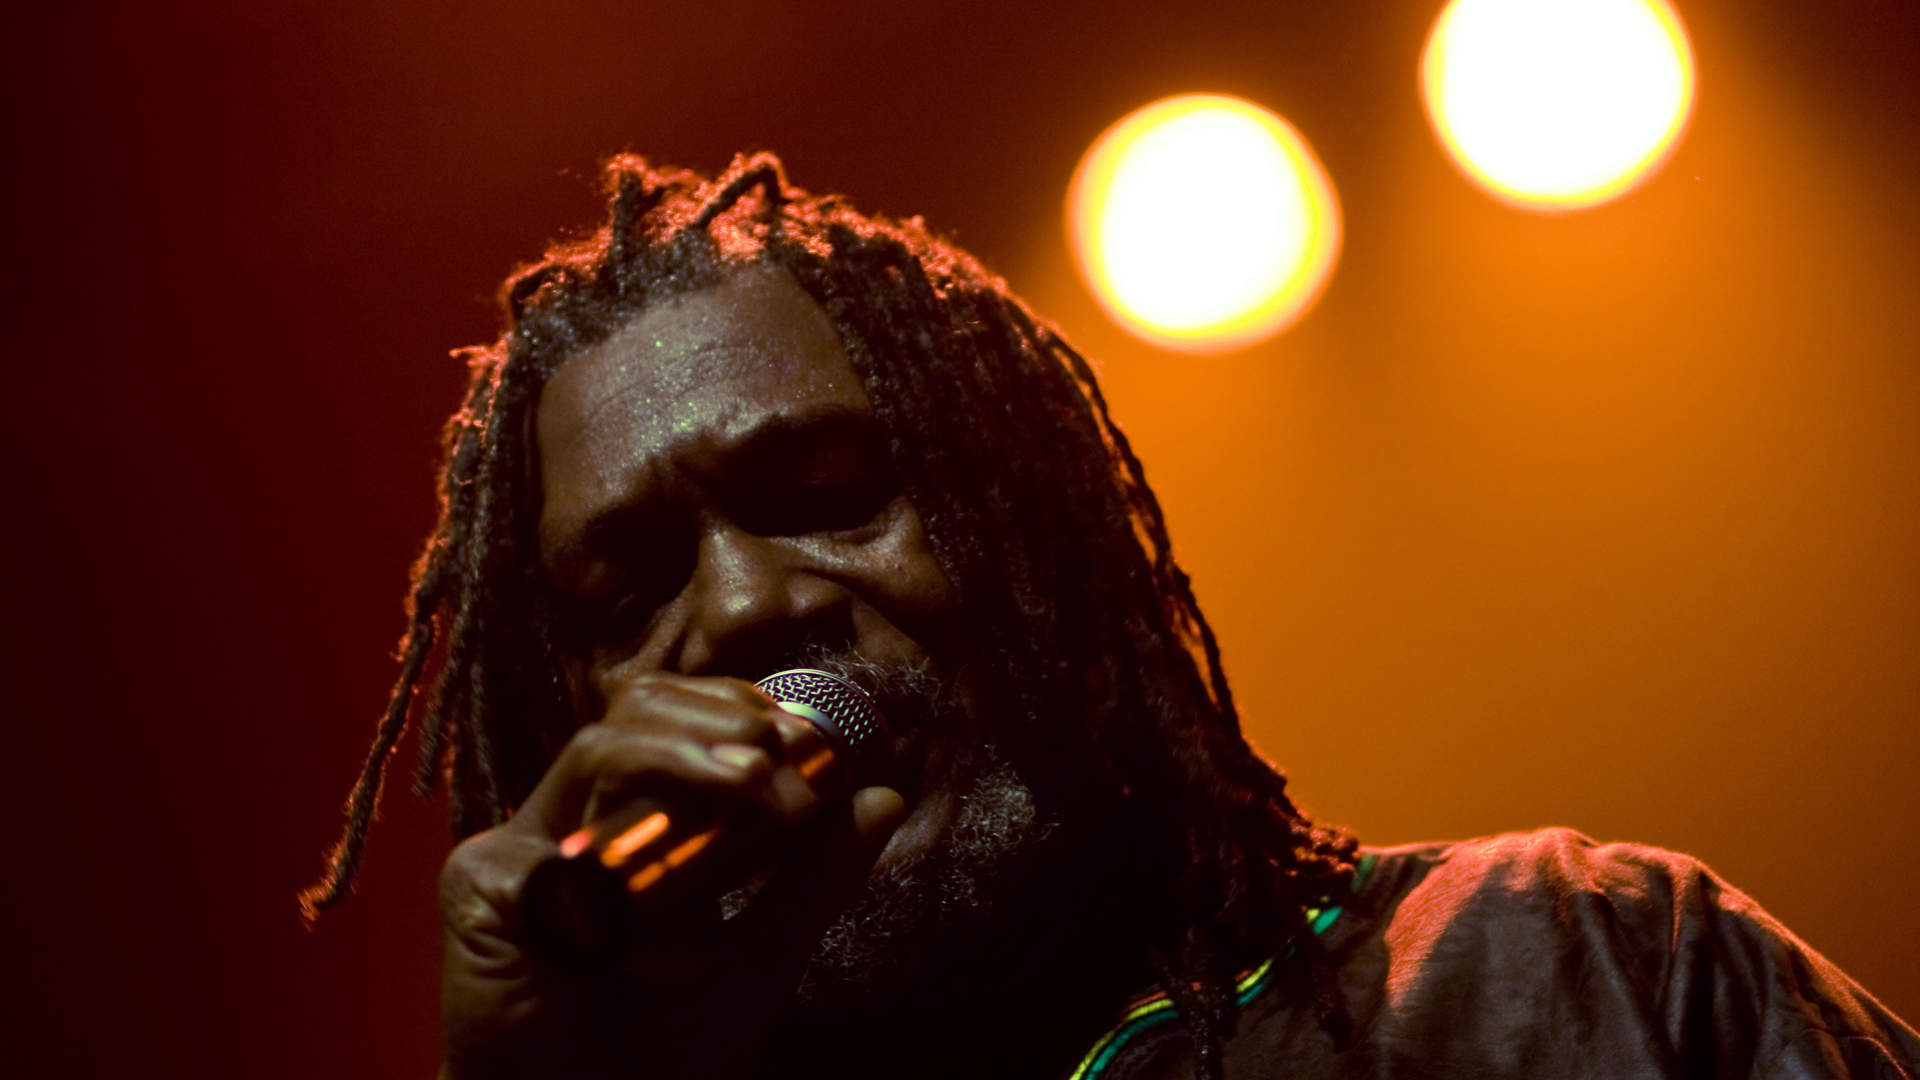 Music Horace Andy HD Wallpaper | Background Image